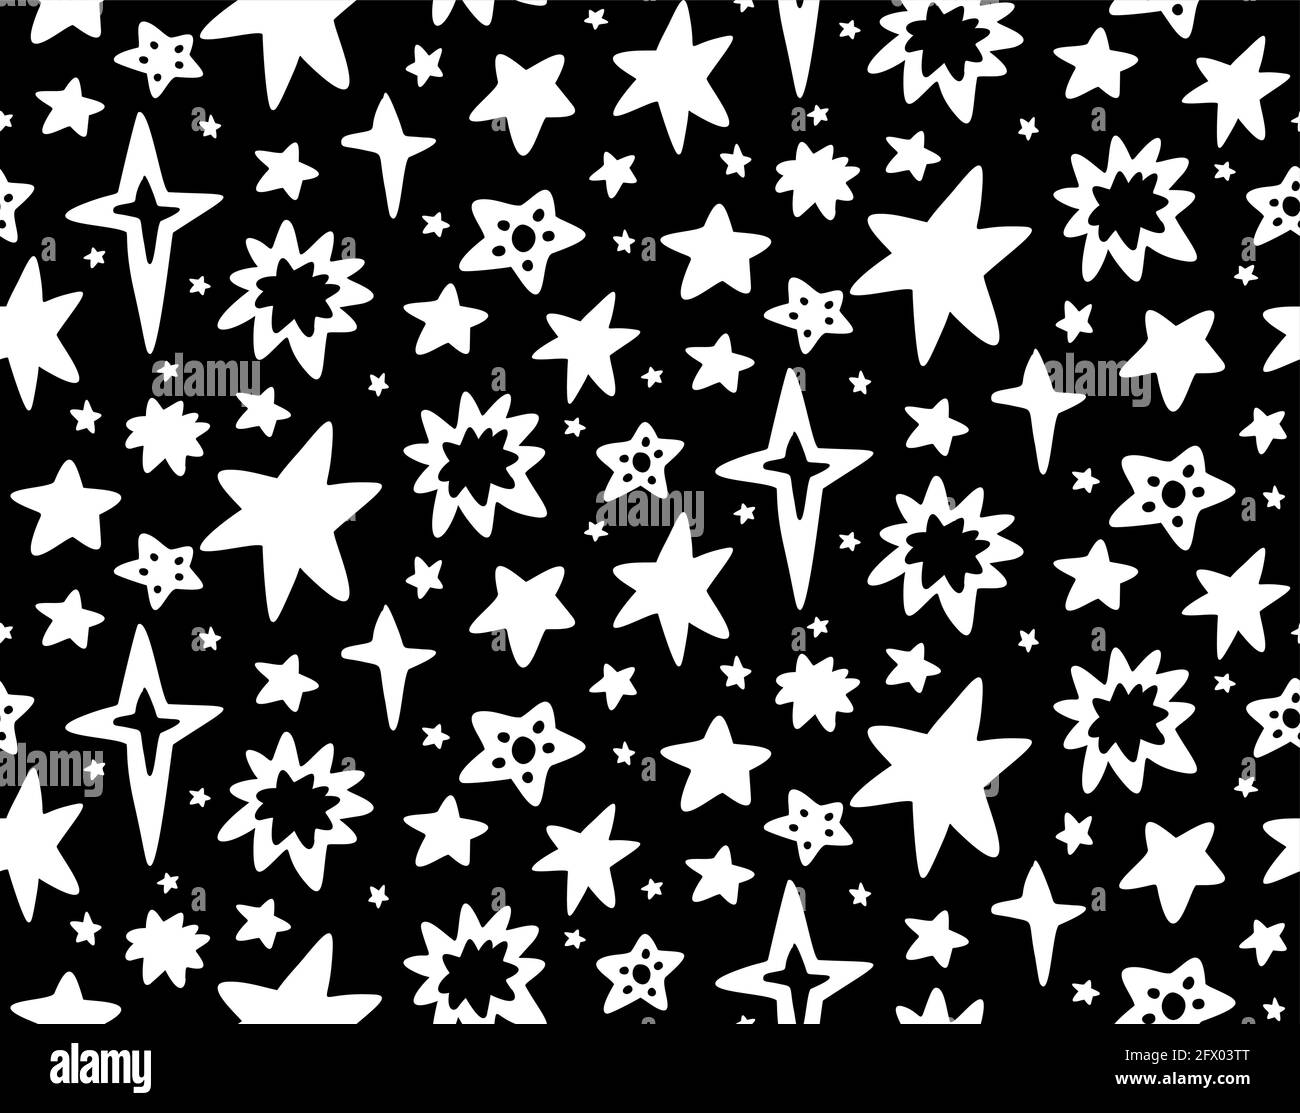 Seamless childish monochrome cosmos pattern with whitte silhouette of different stars on black background. Vector texture of the universe. Vector wall Stock Vector